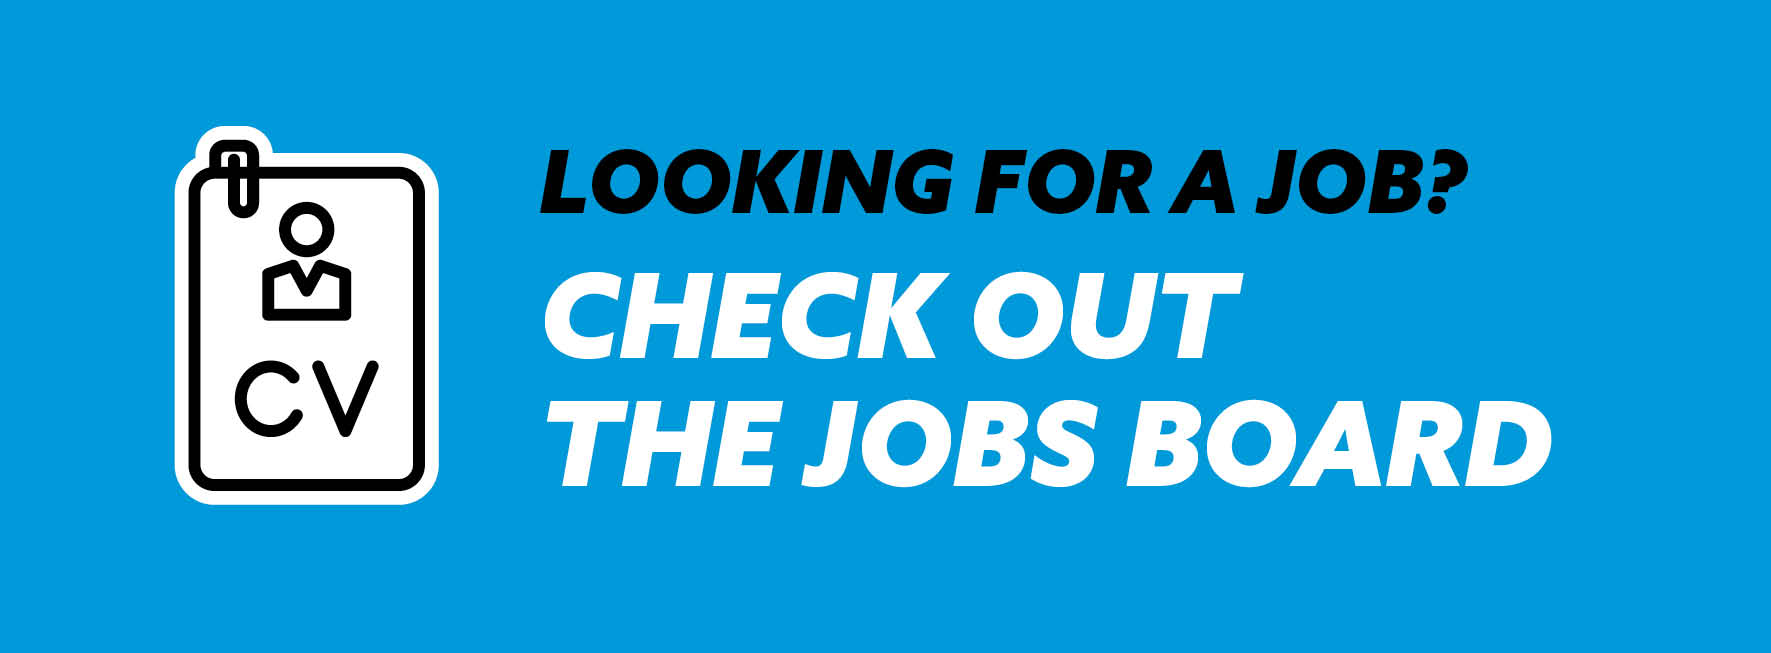 Check out the jobs board